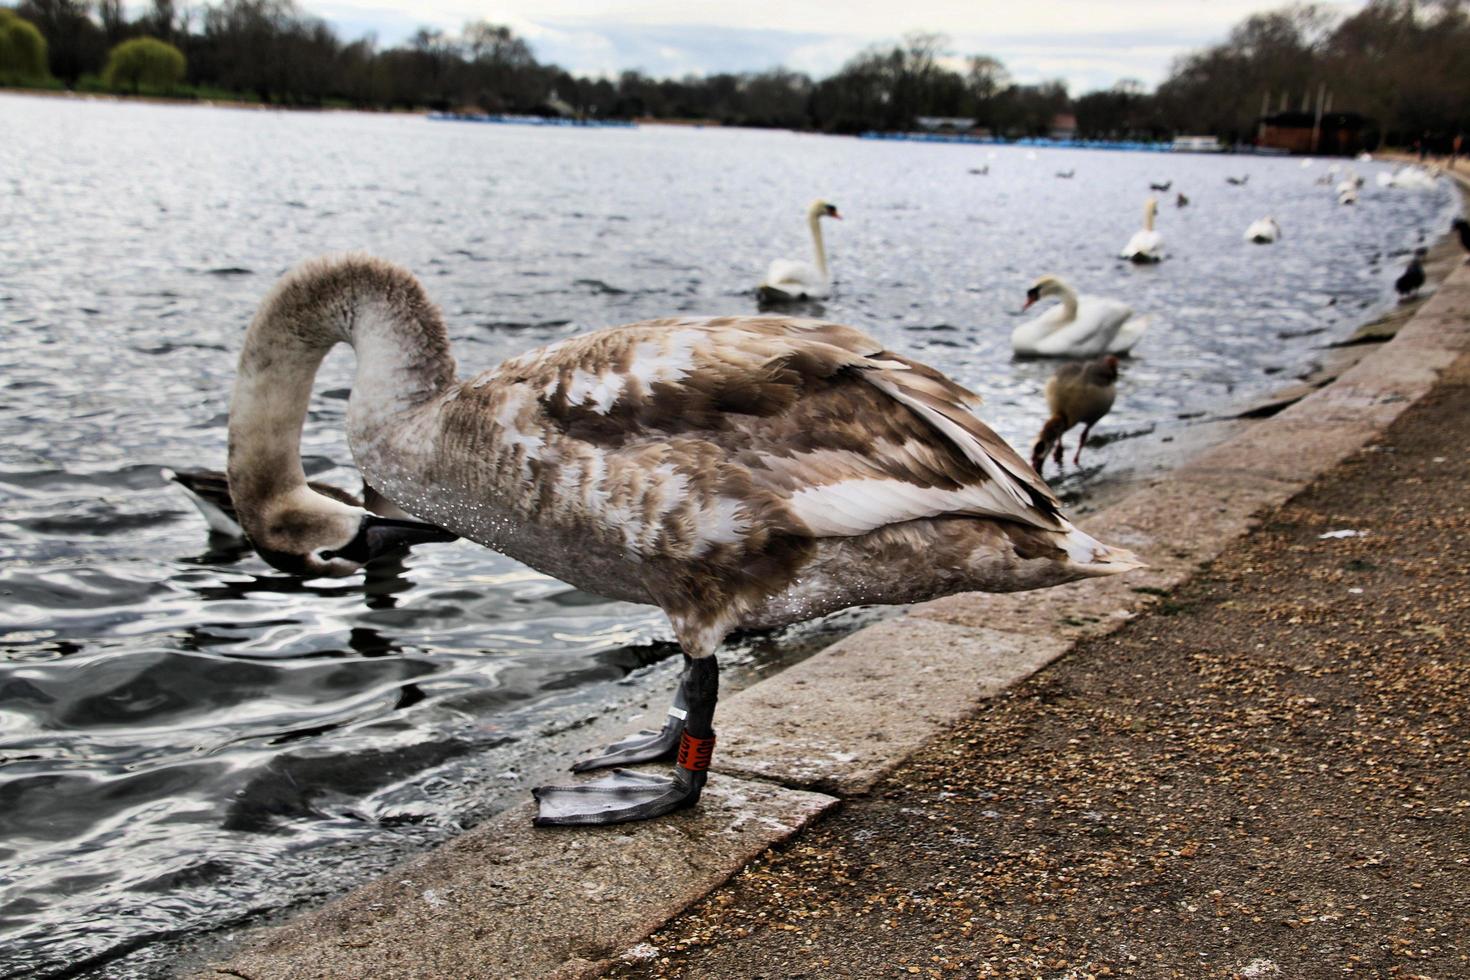 A close up of a Mute Swan in London photo